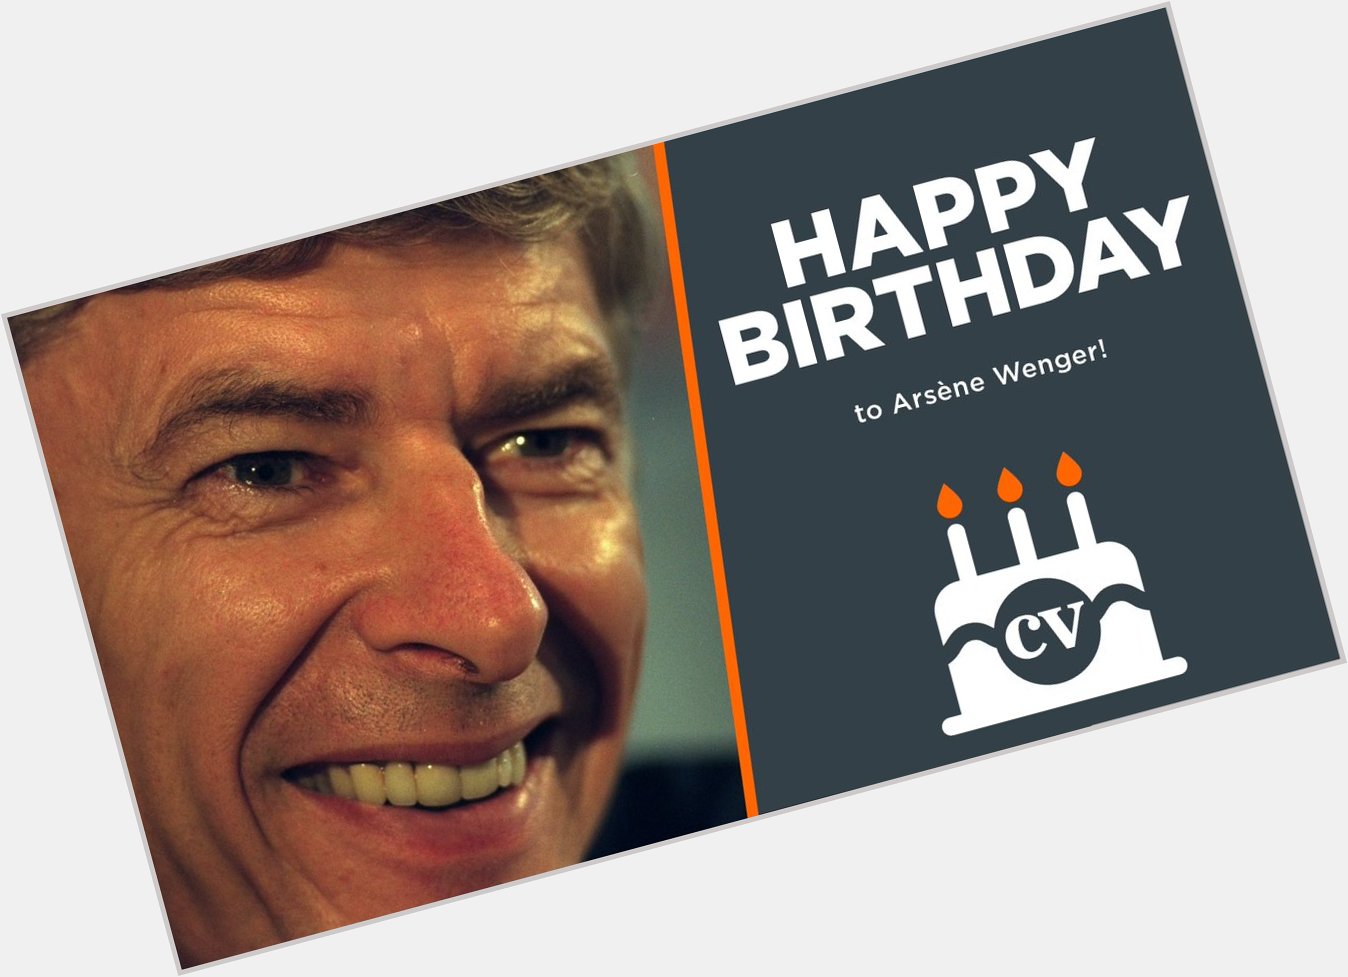  Happy birthday to Arsène Wenger!  Premier League   FA Cup       Community Shield       